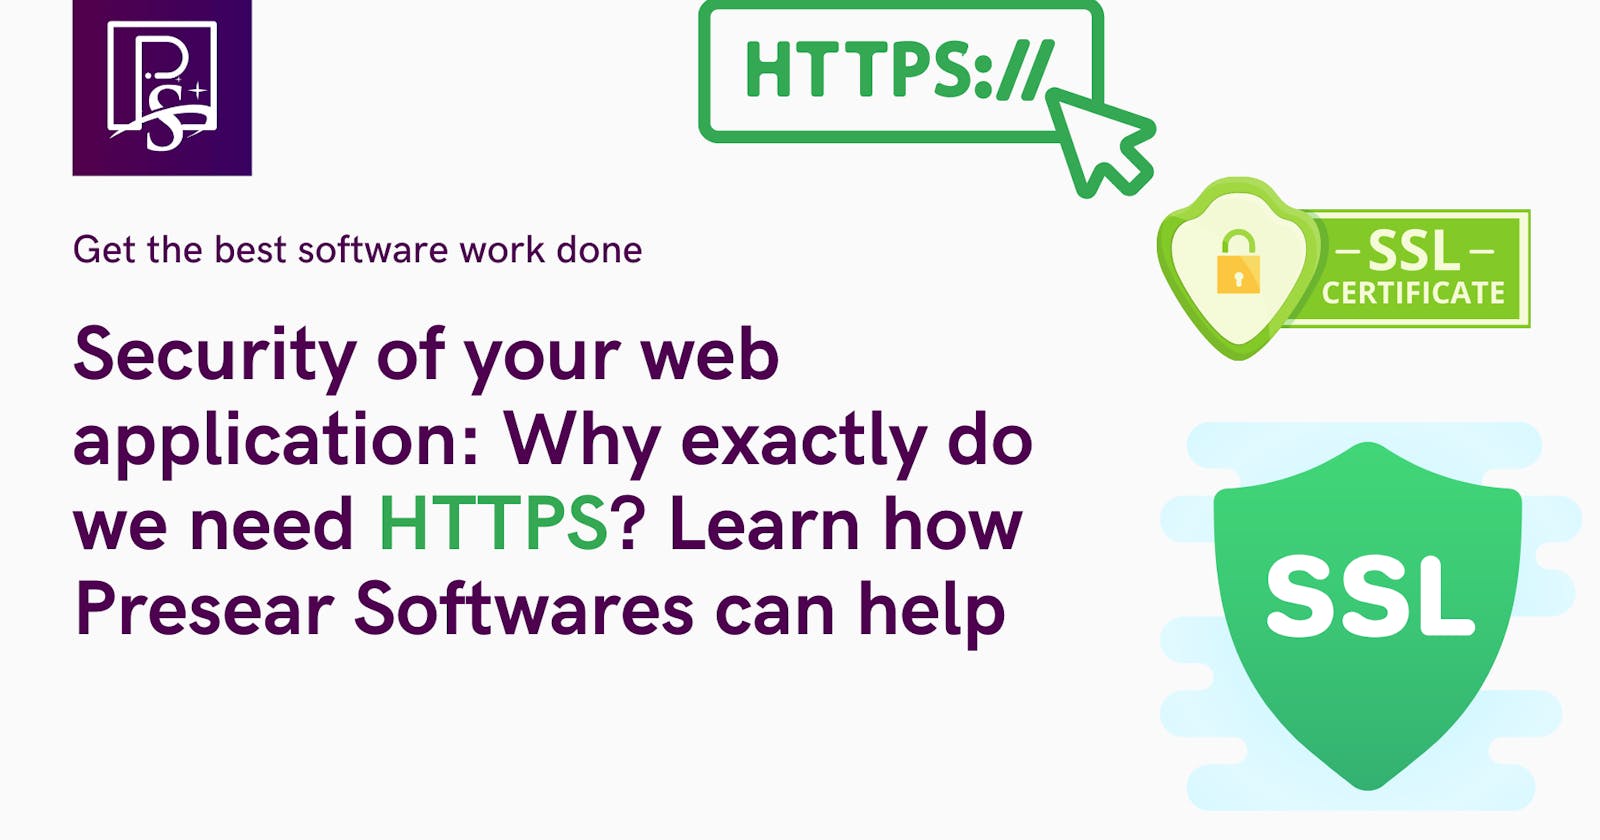 Security of your web application: Why exactly do we need HTTPS? Learn how Presear Software can help!